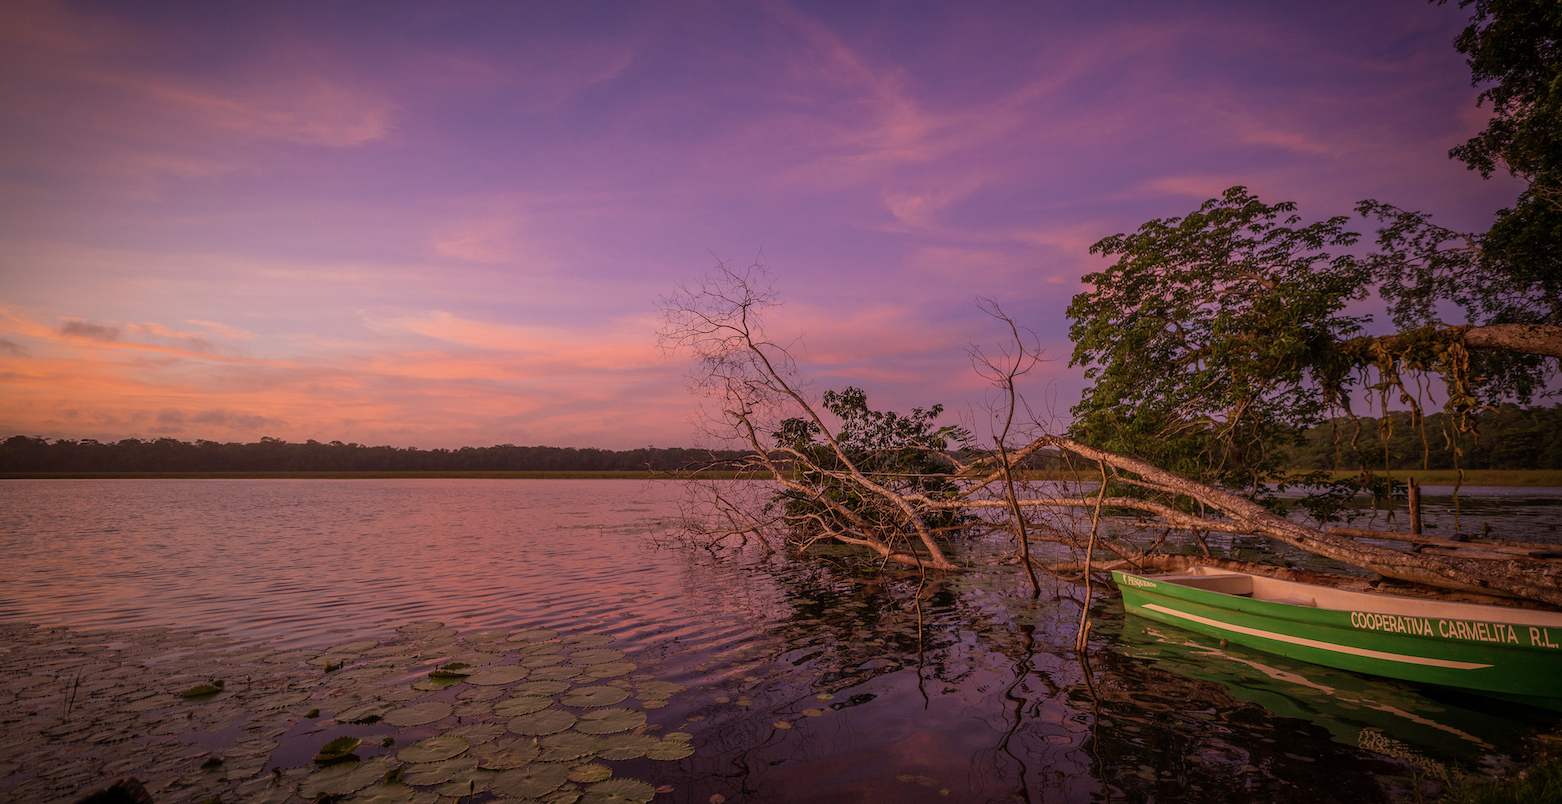 pink orange and purple sunset on a lake with a small boat and lilly pads in the foreground